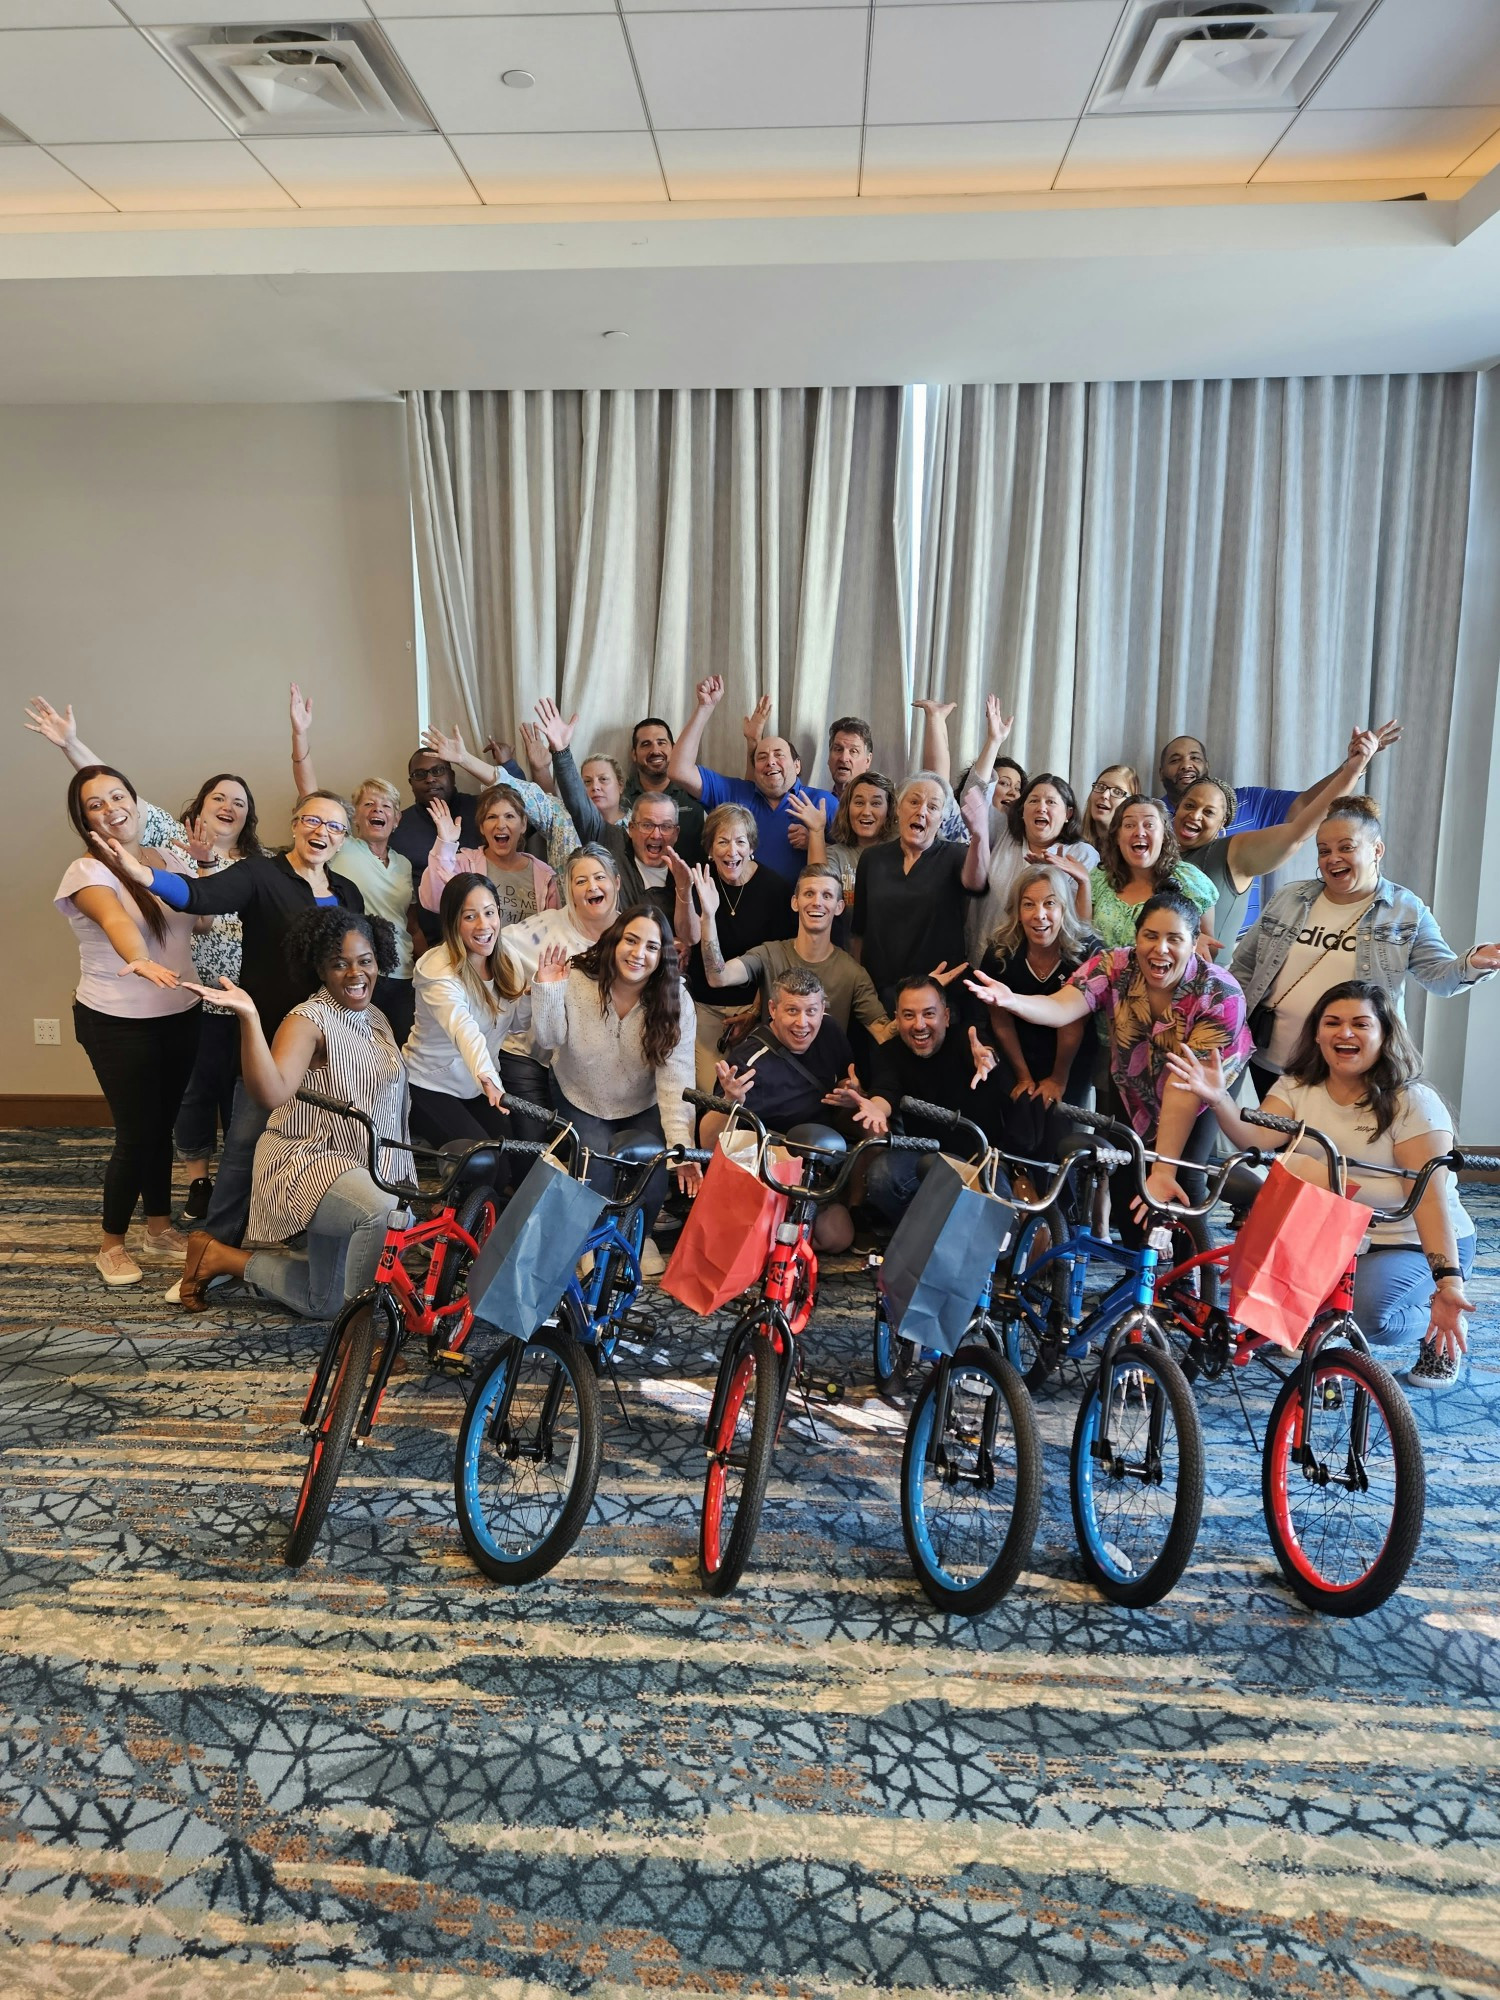 As a teambuilding exercise, the Underwriting Team built 6 bikes to donate to underprivileged kids in the Sarasota area.